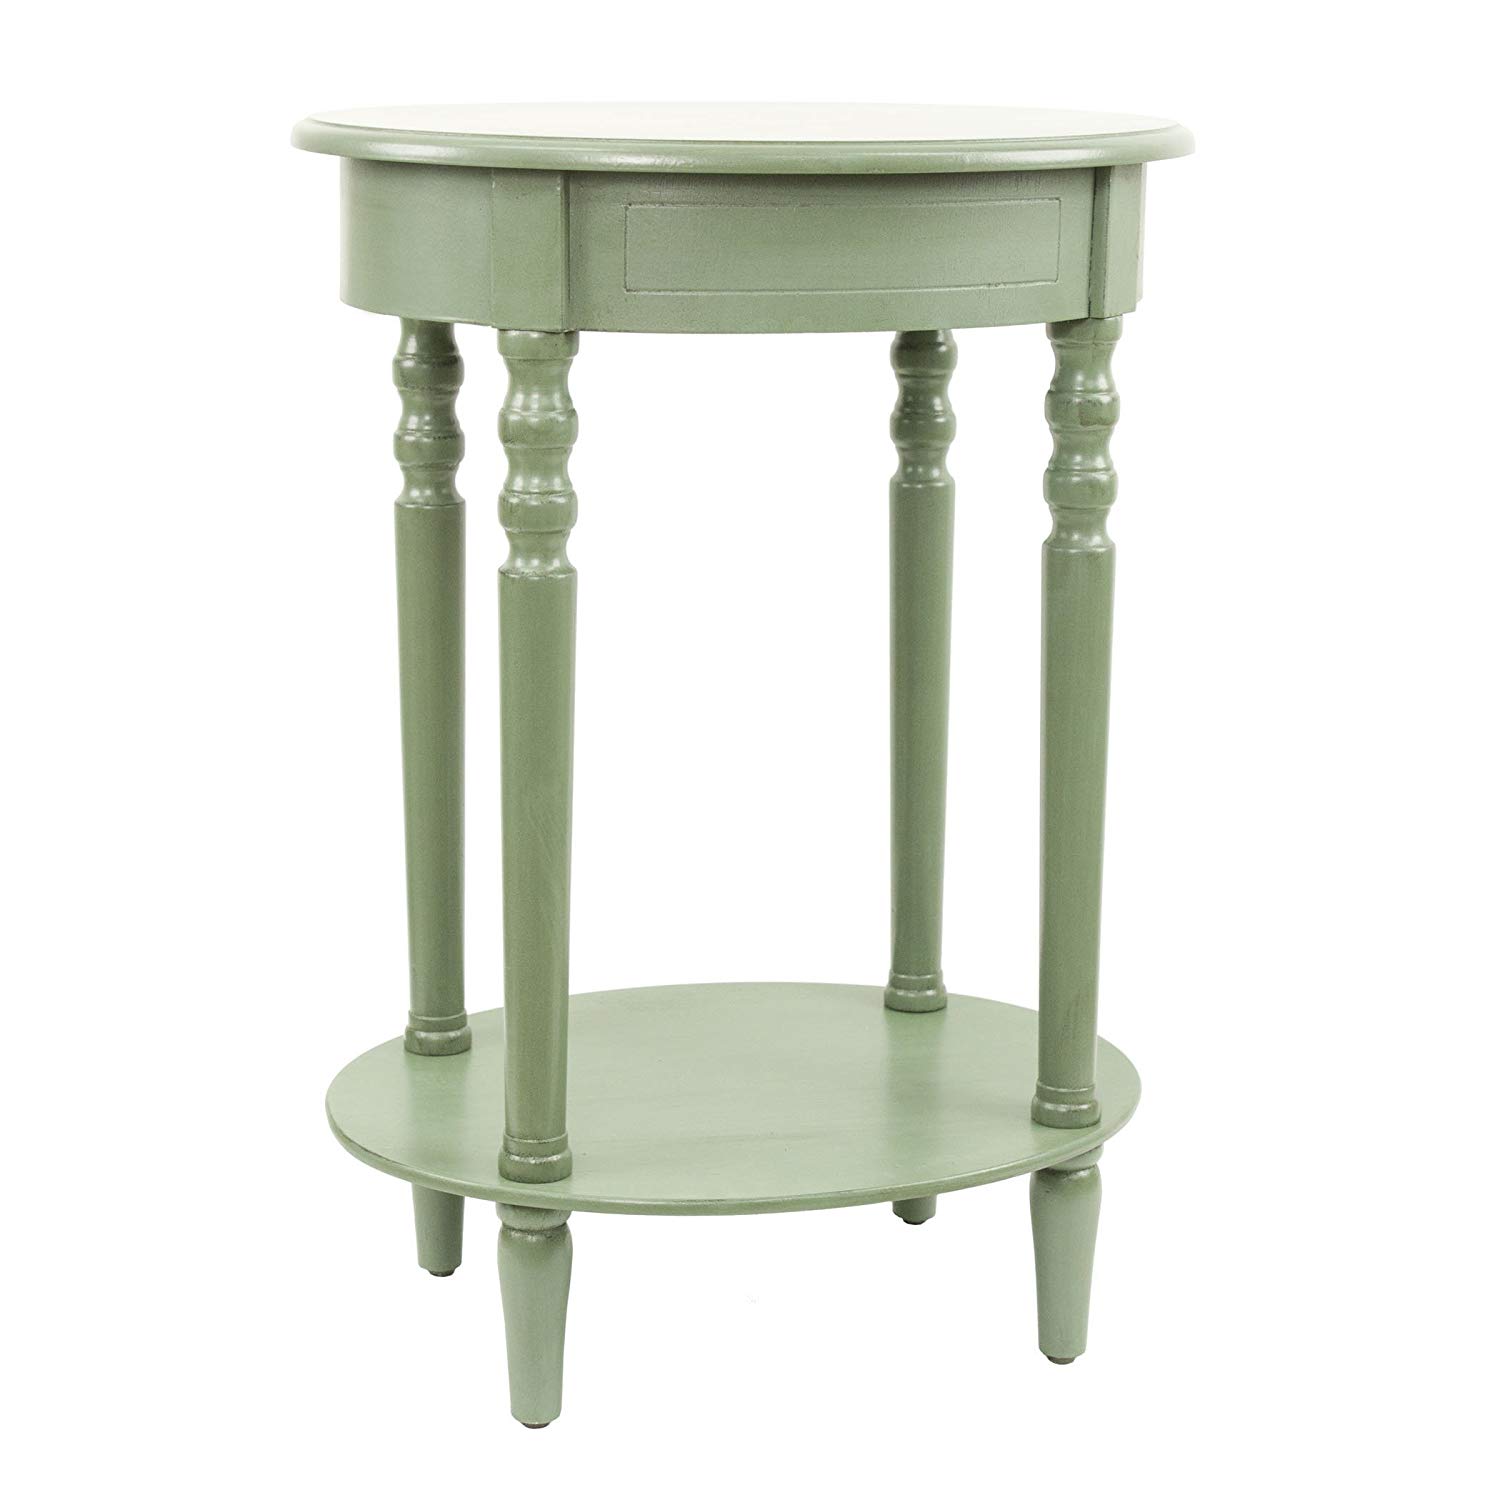 decor therapy simplify oval accent table antique green kitchen dining french trestle ikea accessories rustic style end tables plain cloths narrow bedside exterior furniture west